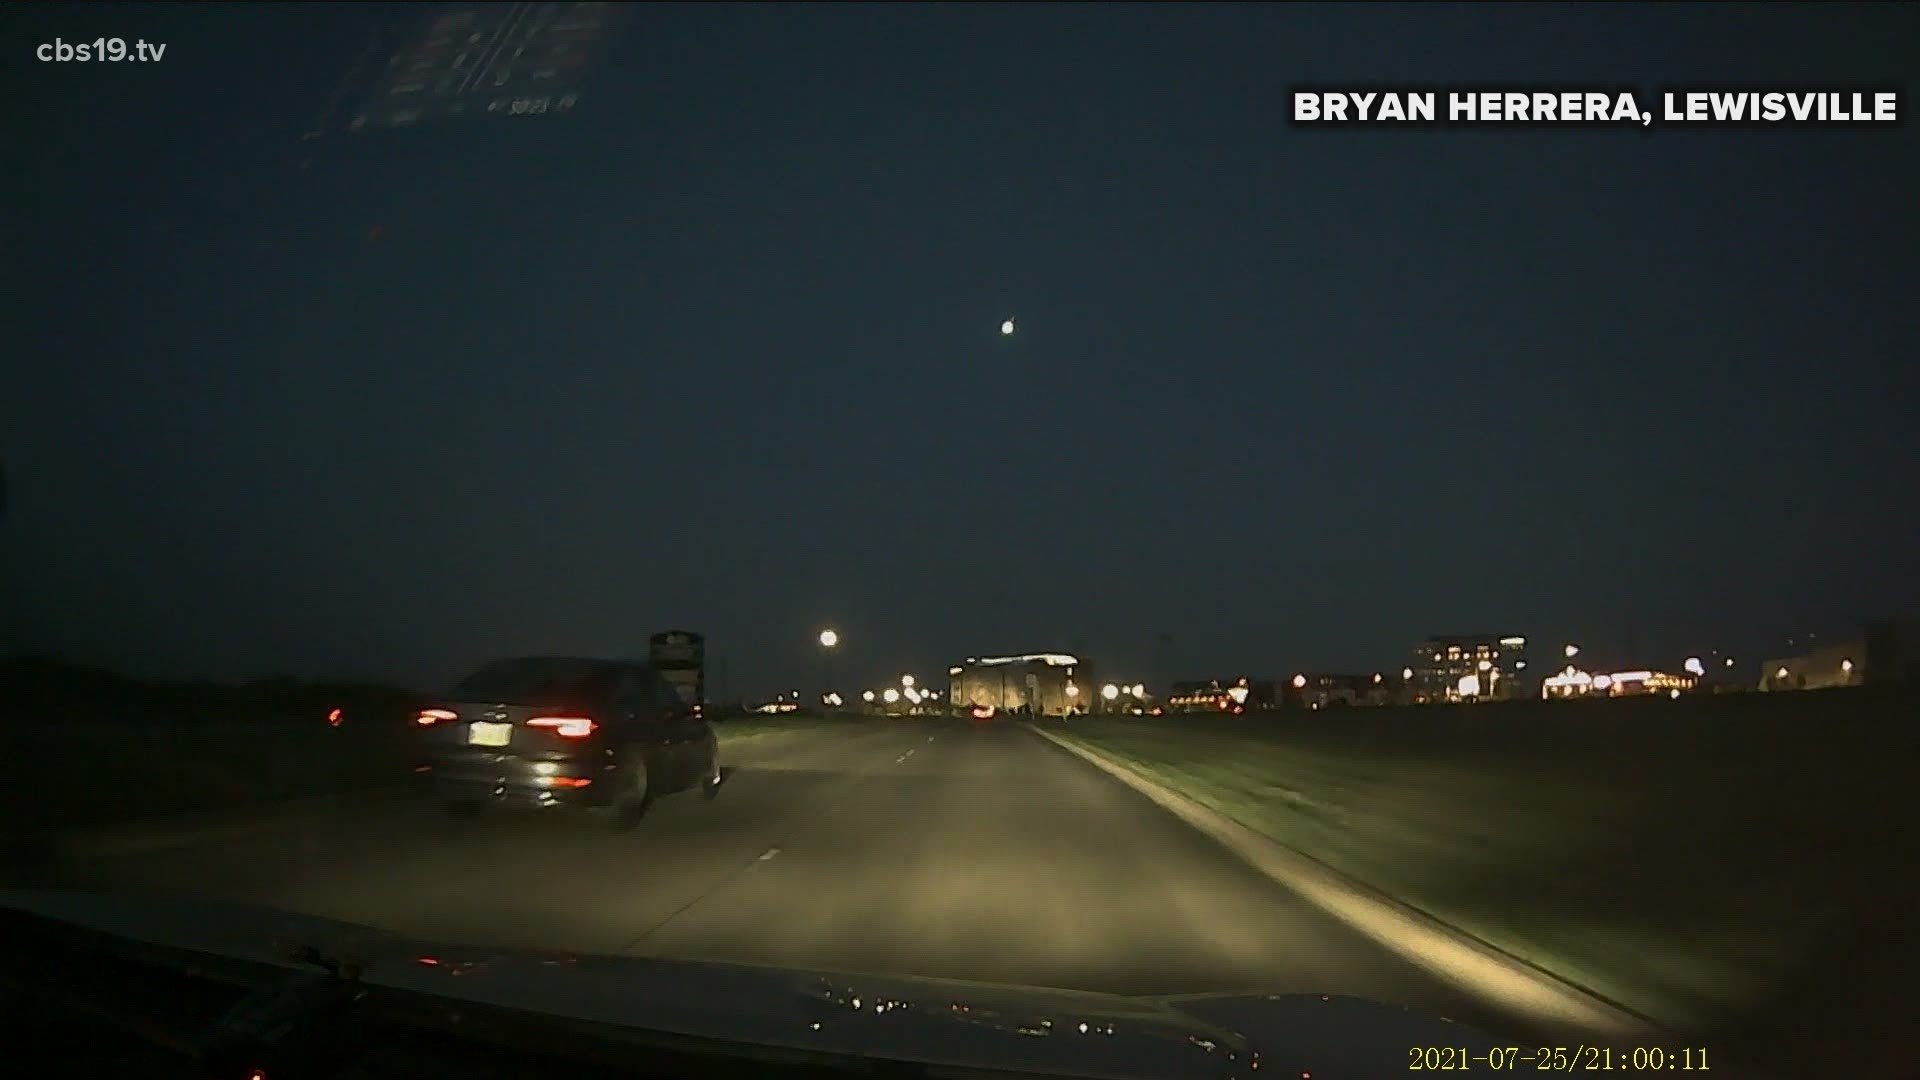 Videos coming in from across the Lone Star state show the fireball illuminating the Summer sky with a blazing tail.